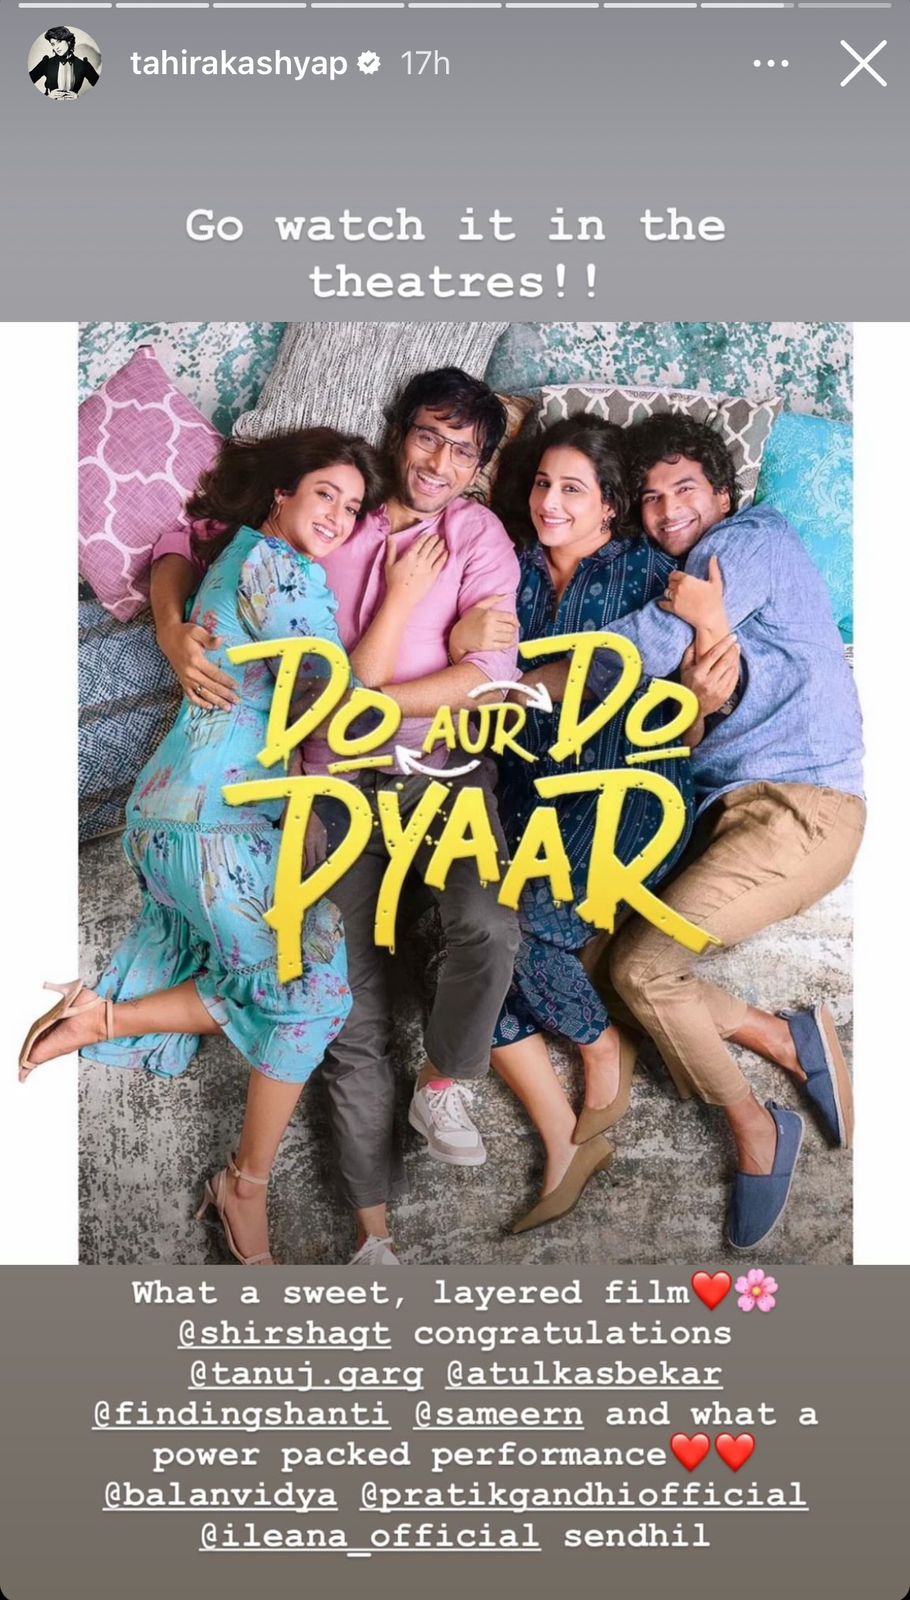 Top Filmmakers Give Massive Thumbs Up to “DO AUR DO PYAAR”